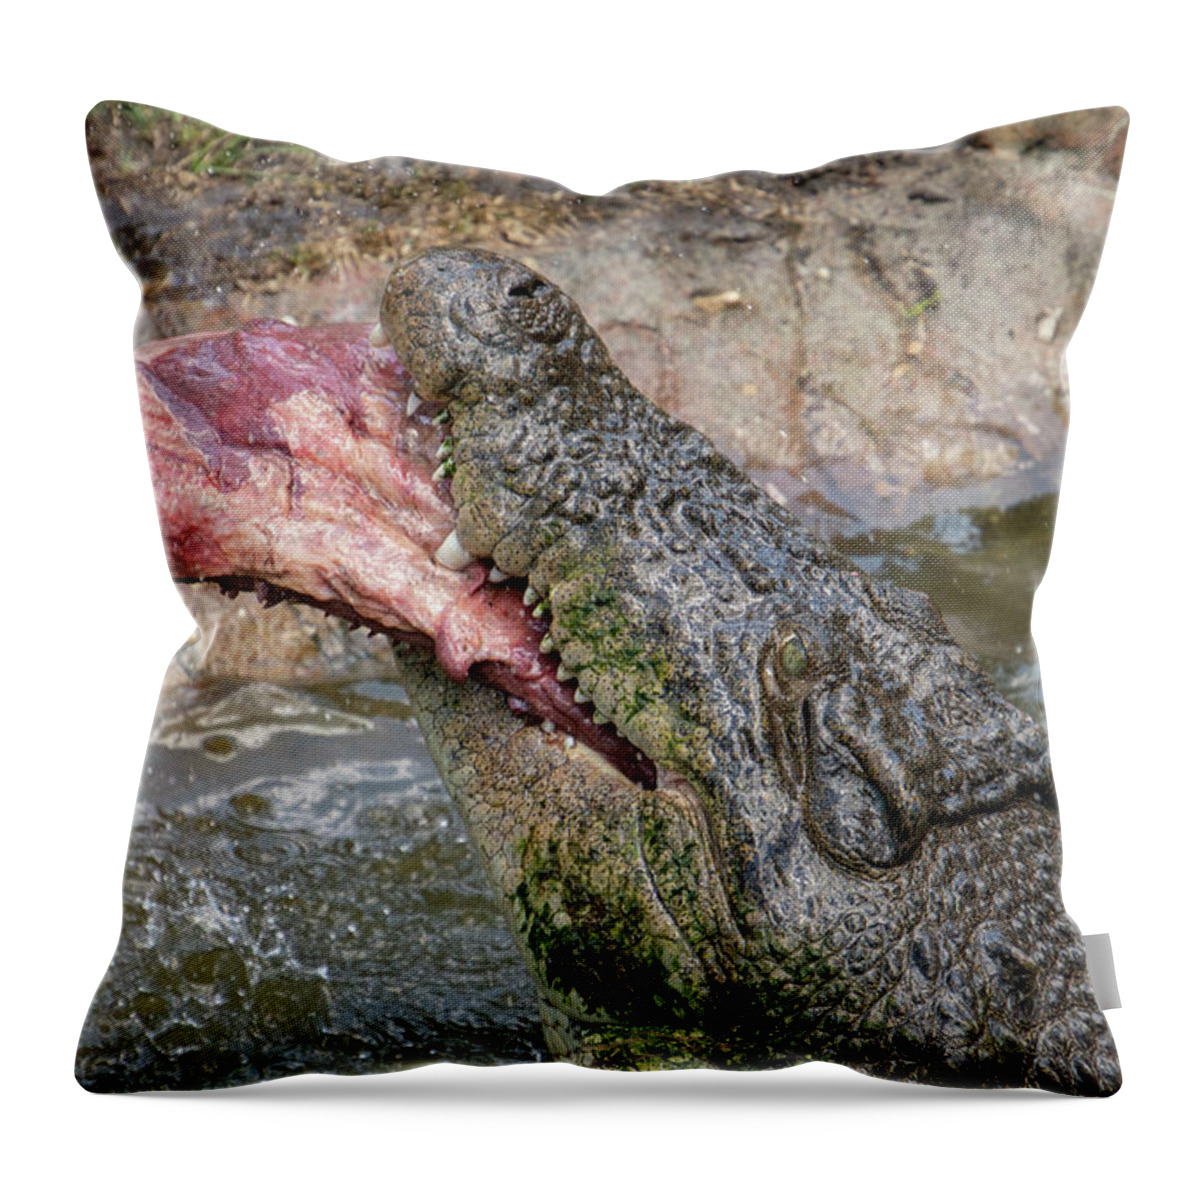 Saltwater Throw Pillow featuring the photograph Saltwater Crocodile Eating #1 by Carolyn Hutchins